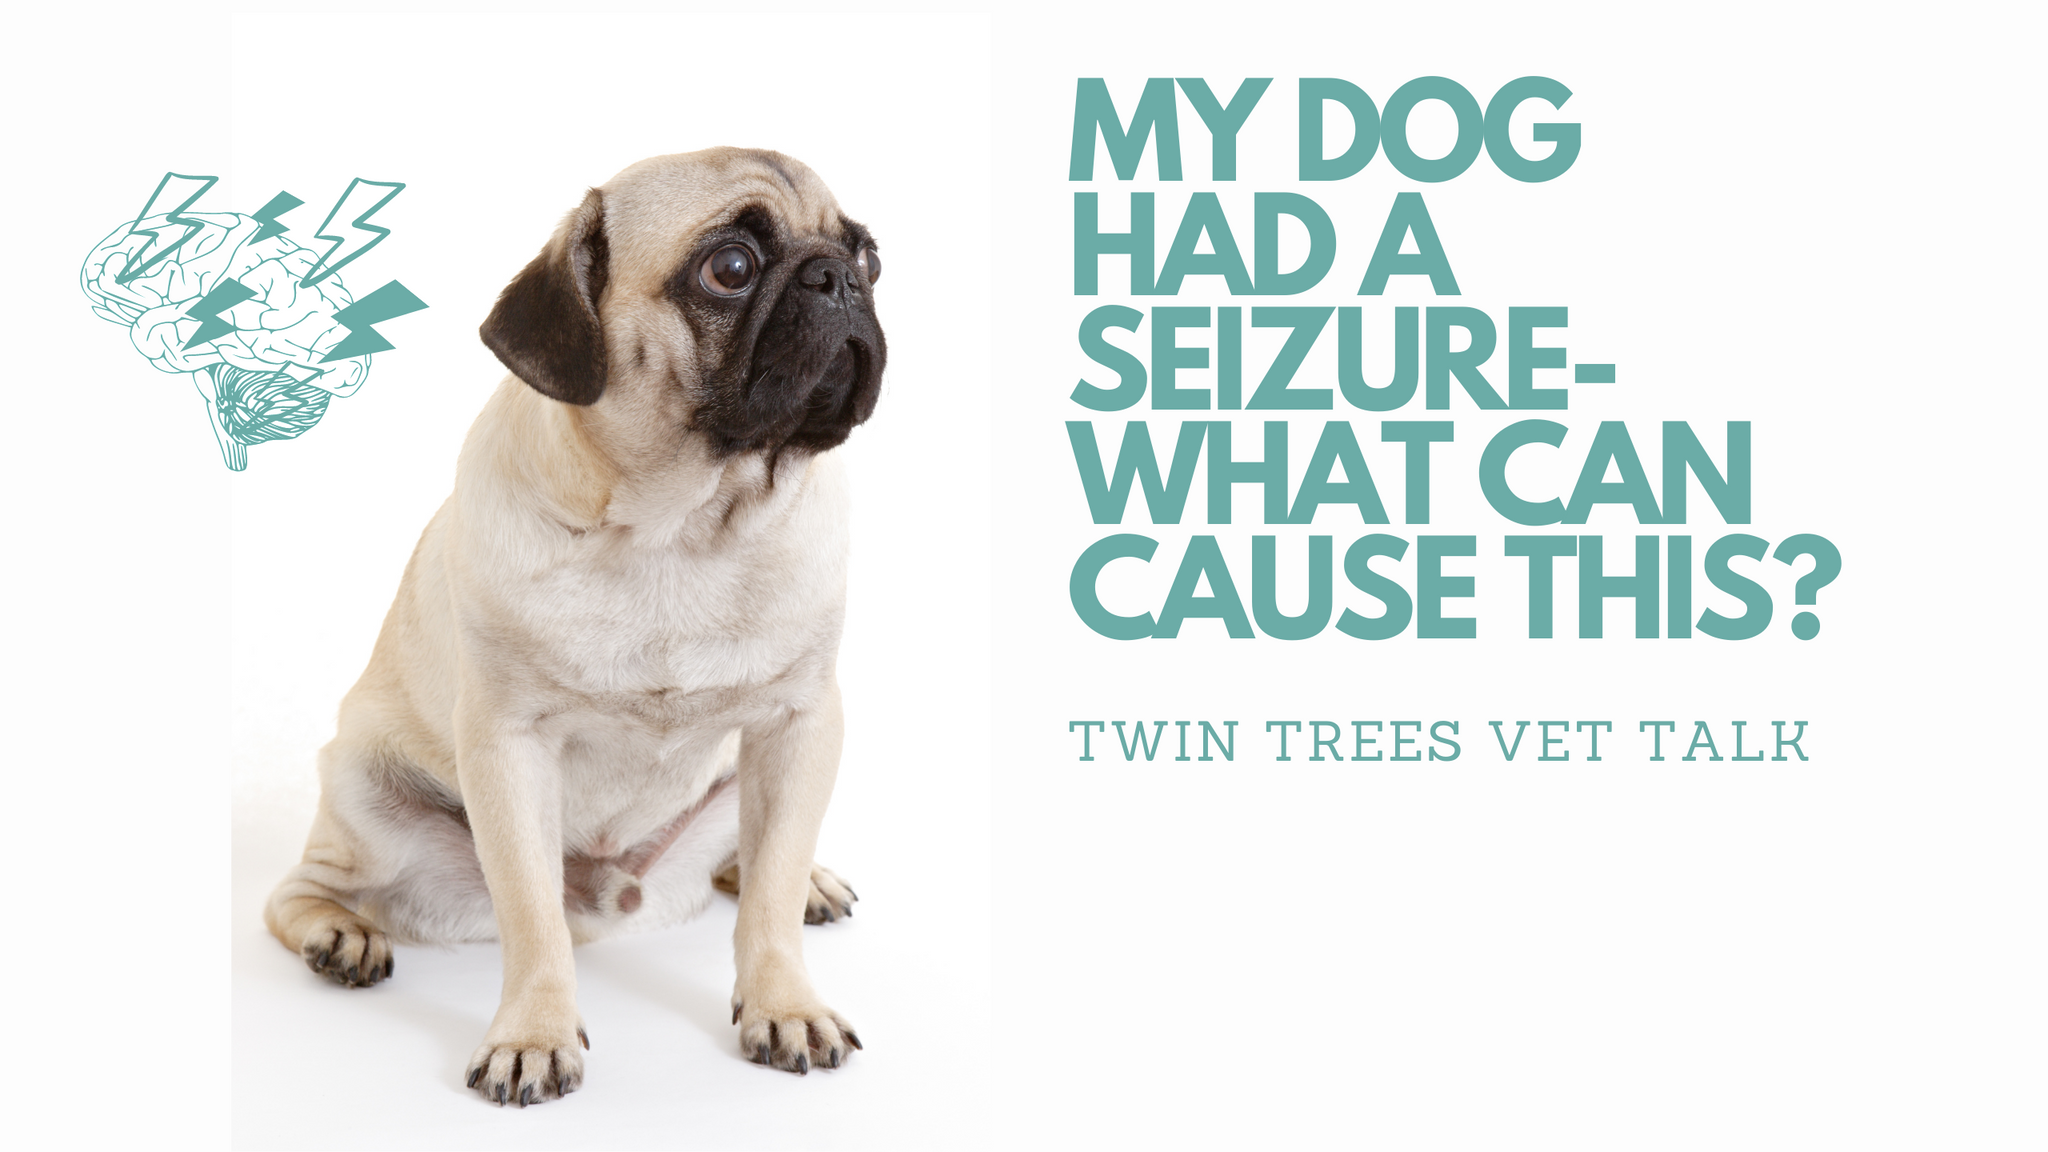 Q) My Dog Had a Seizure. What Can Cause This? What Can Help Him?